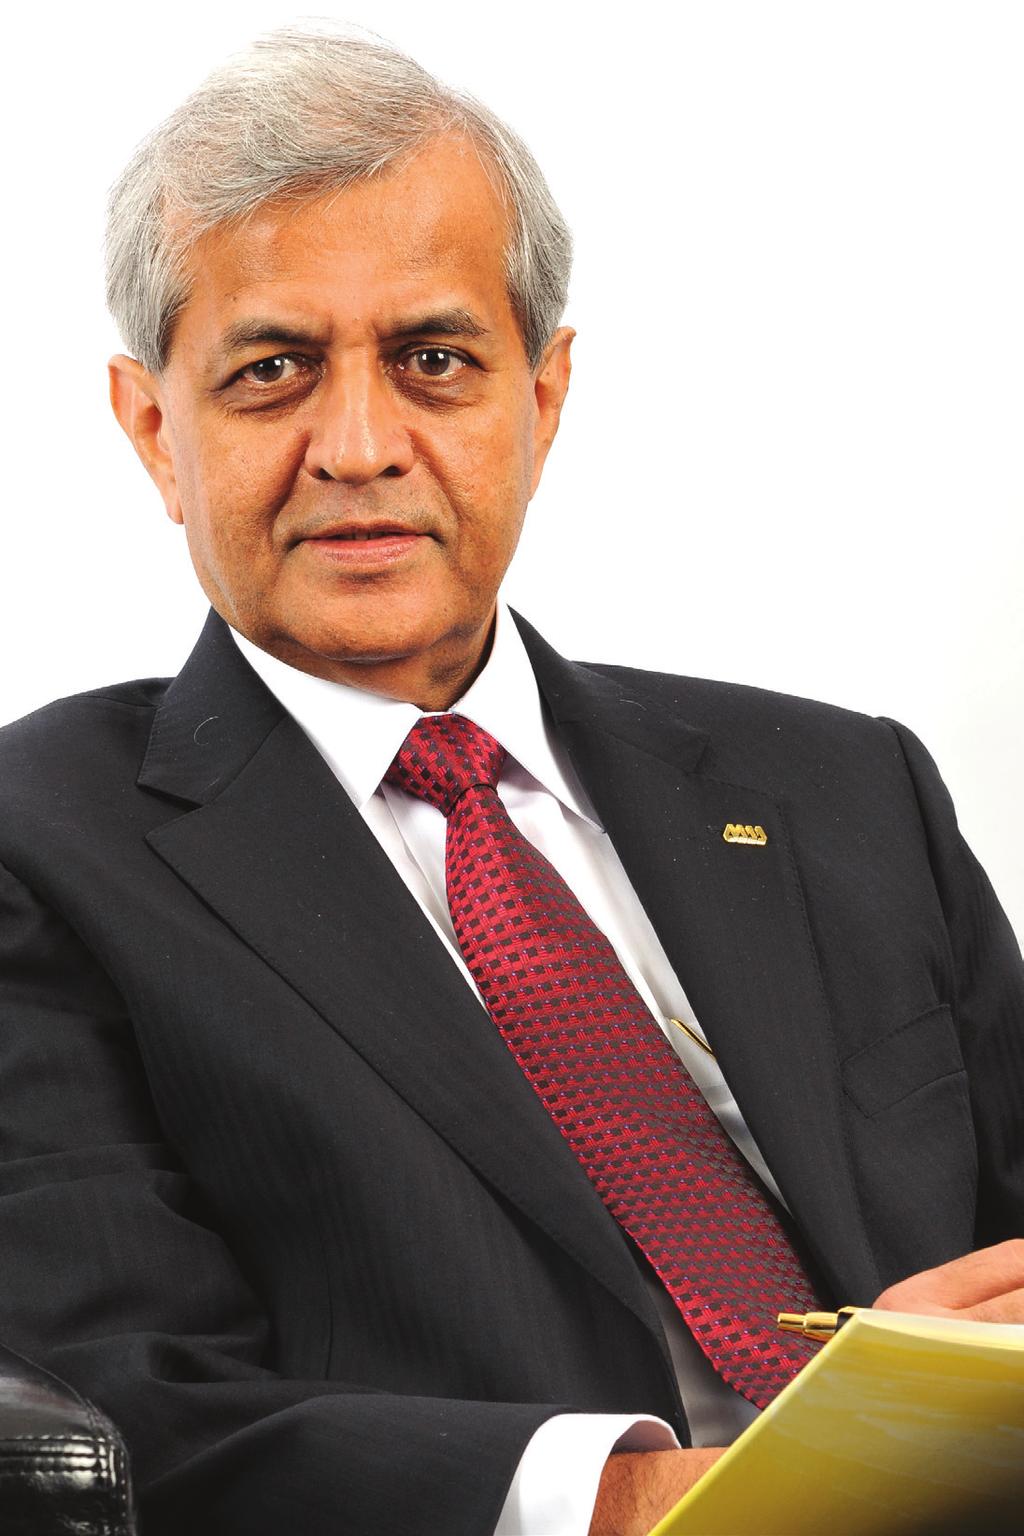 10 Dato Narendrakumar Jasani A/L Chunilal Rugnath was appointed to the Board on 5 September 2012 as an Independent Non-Executive Director.